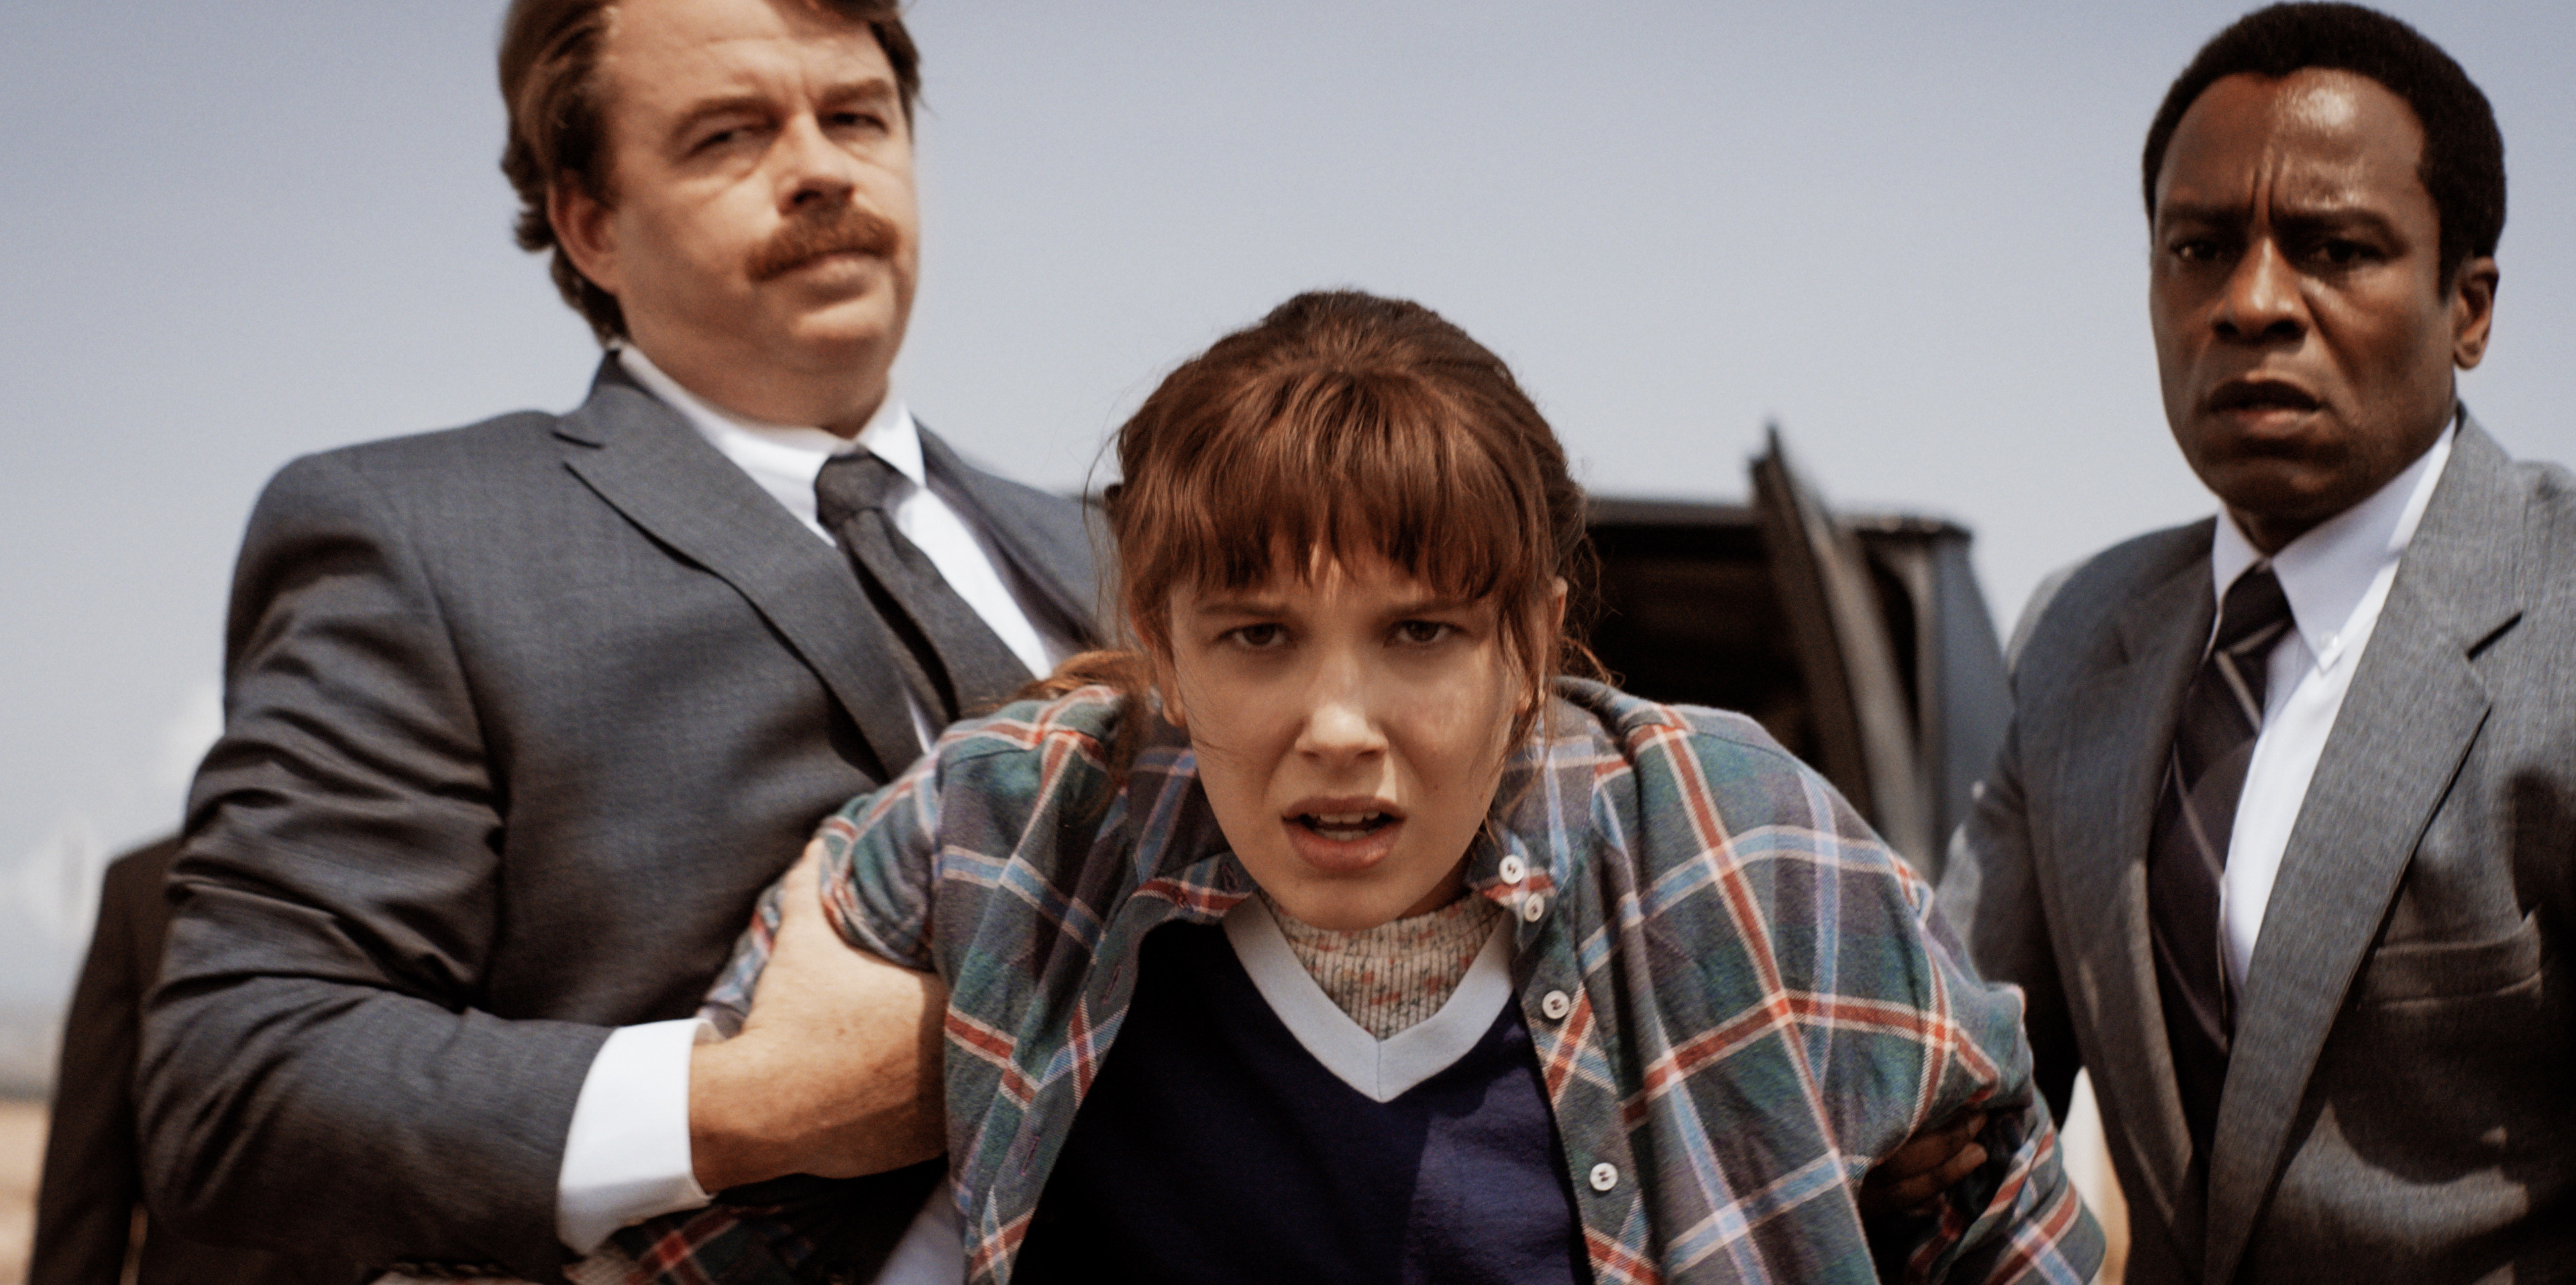 Stranger Things Season 4 Part 2: What we know - Android Authority